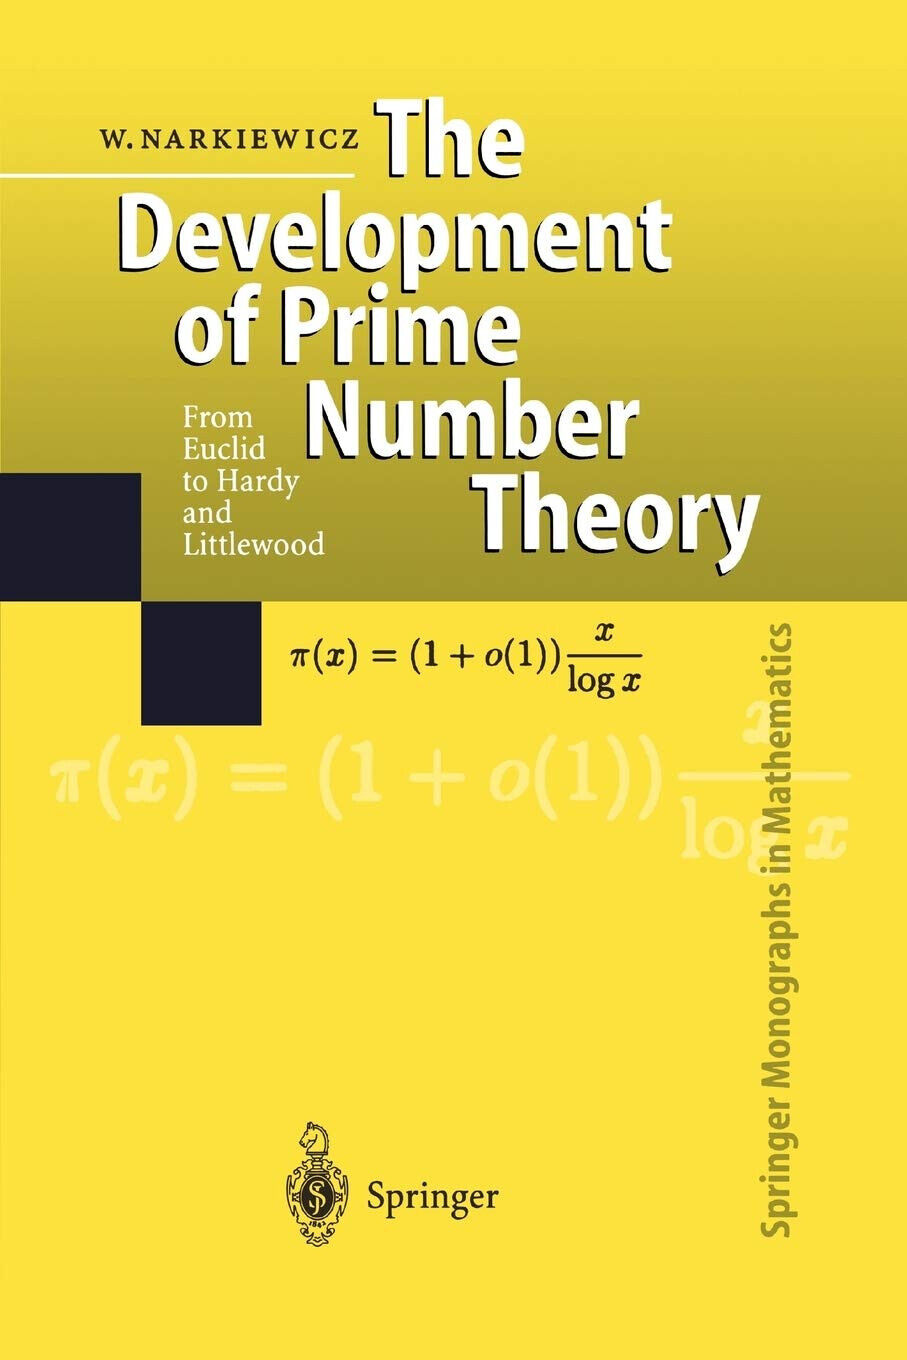 The Development of Prime Number Theory - Wladyslaw Narkiewicz - Springer, 2010